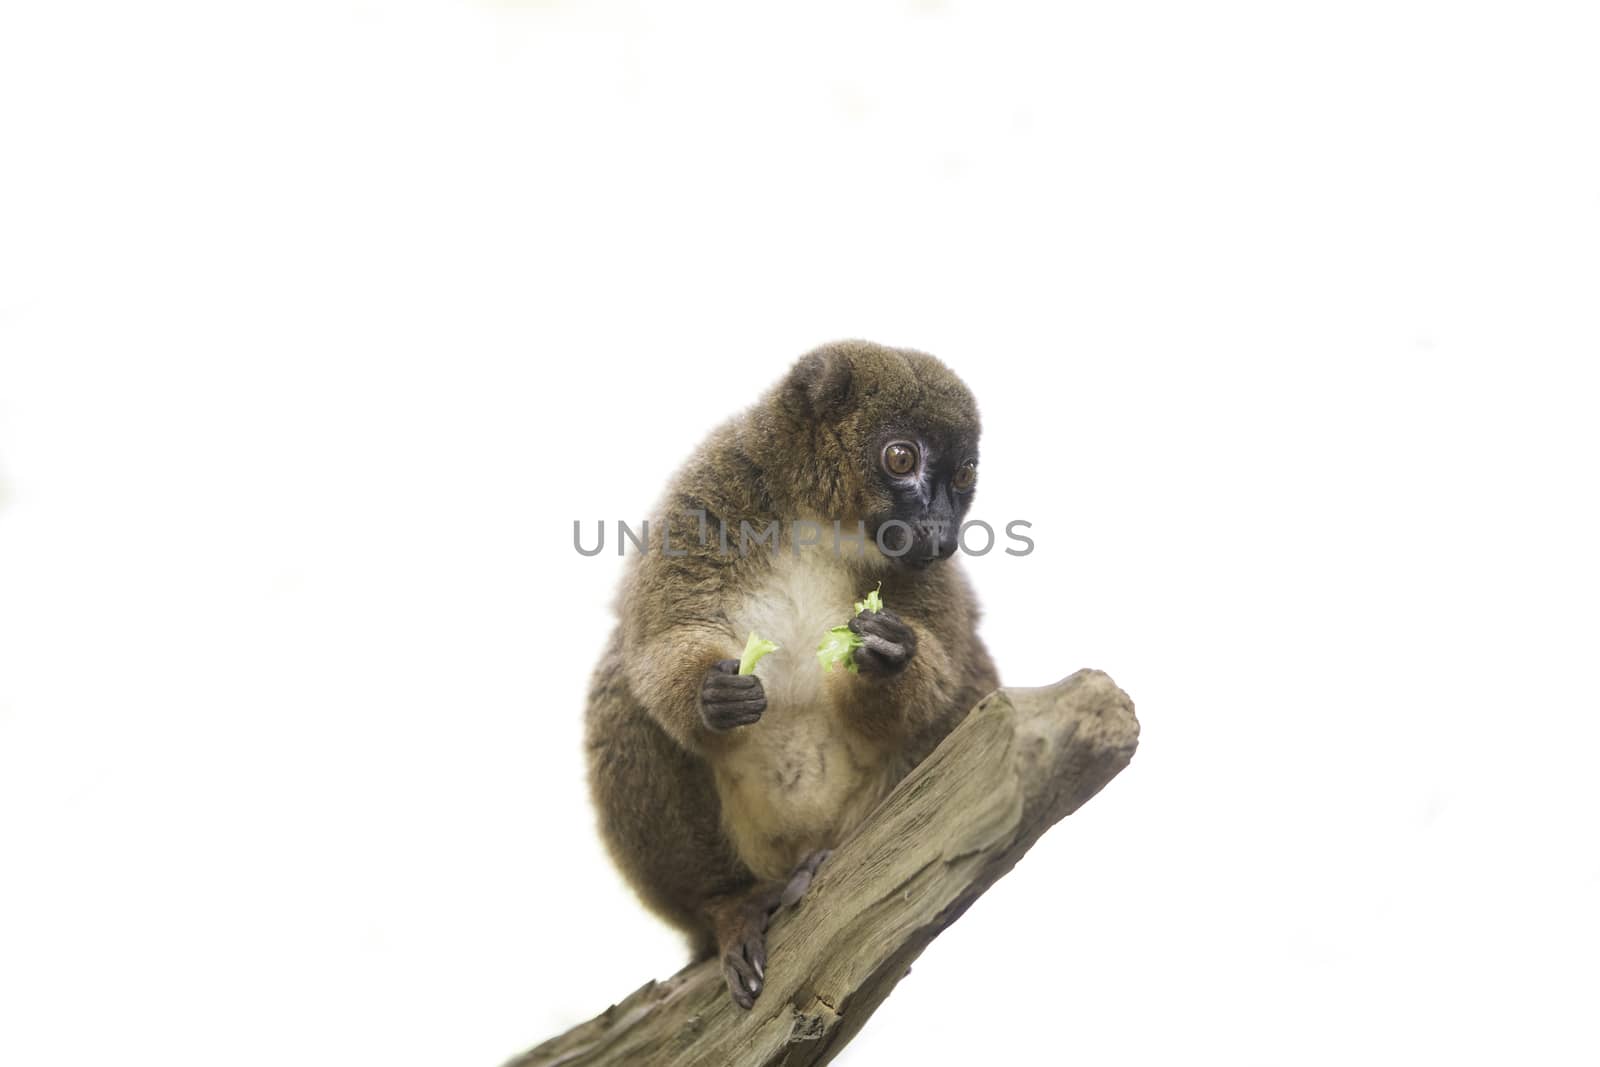 Red bellied lemur sitting on branch, isolated